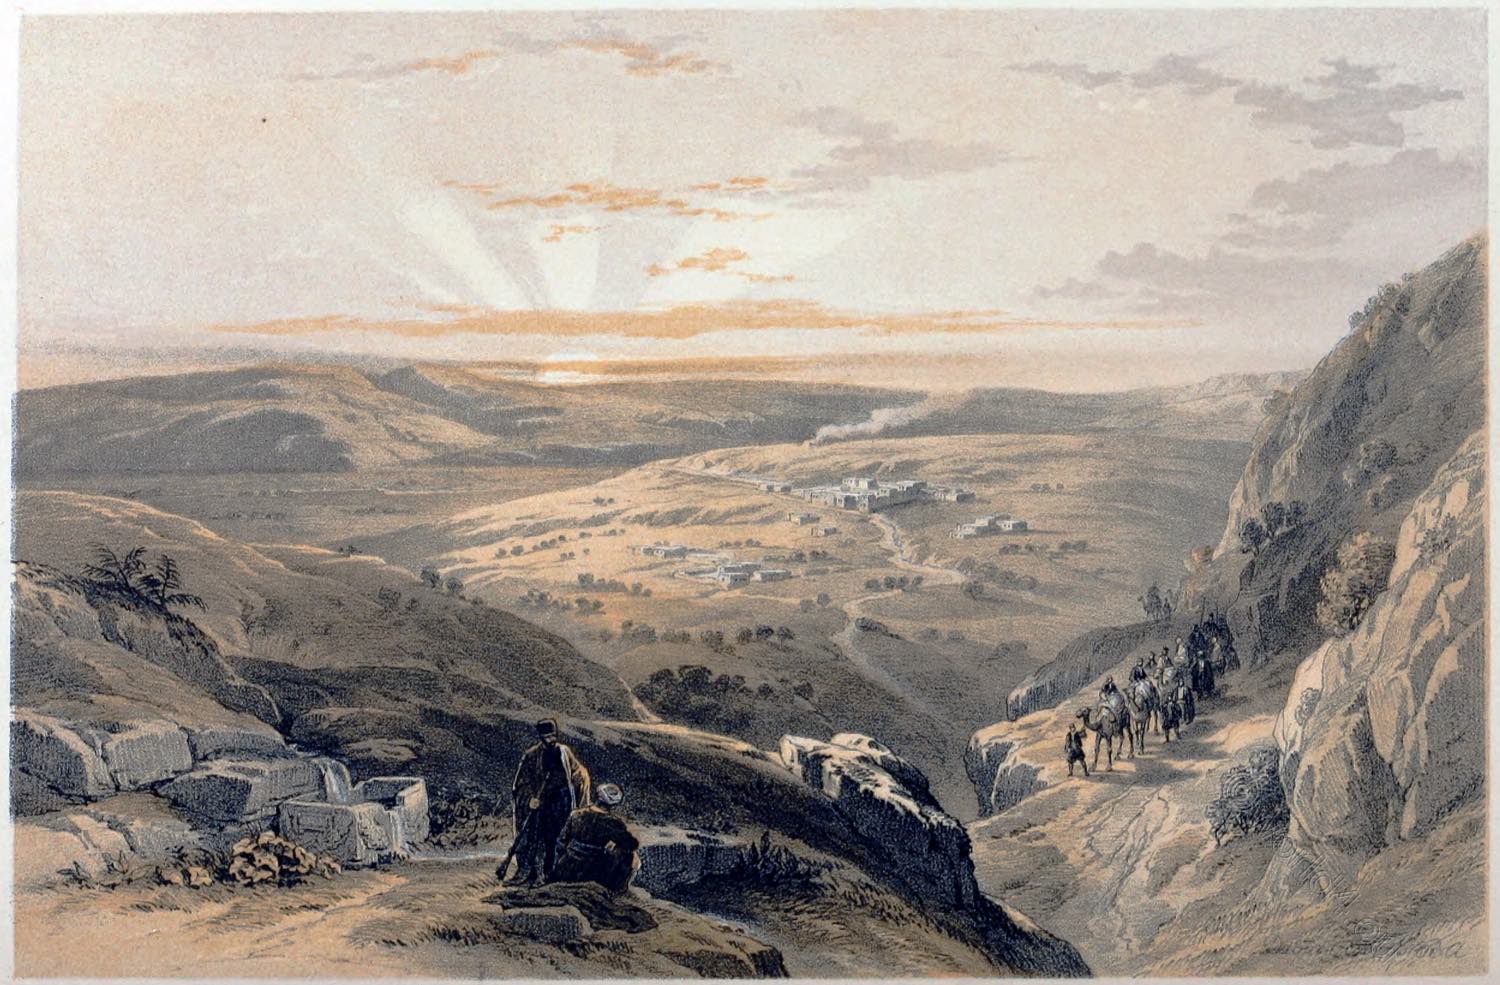 Cana of Galilee, Holy Land. General View by David Roberts.